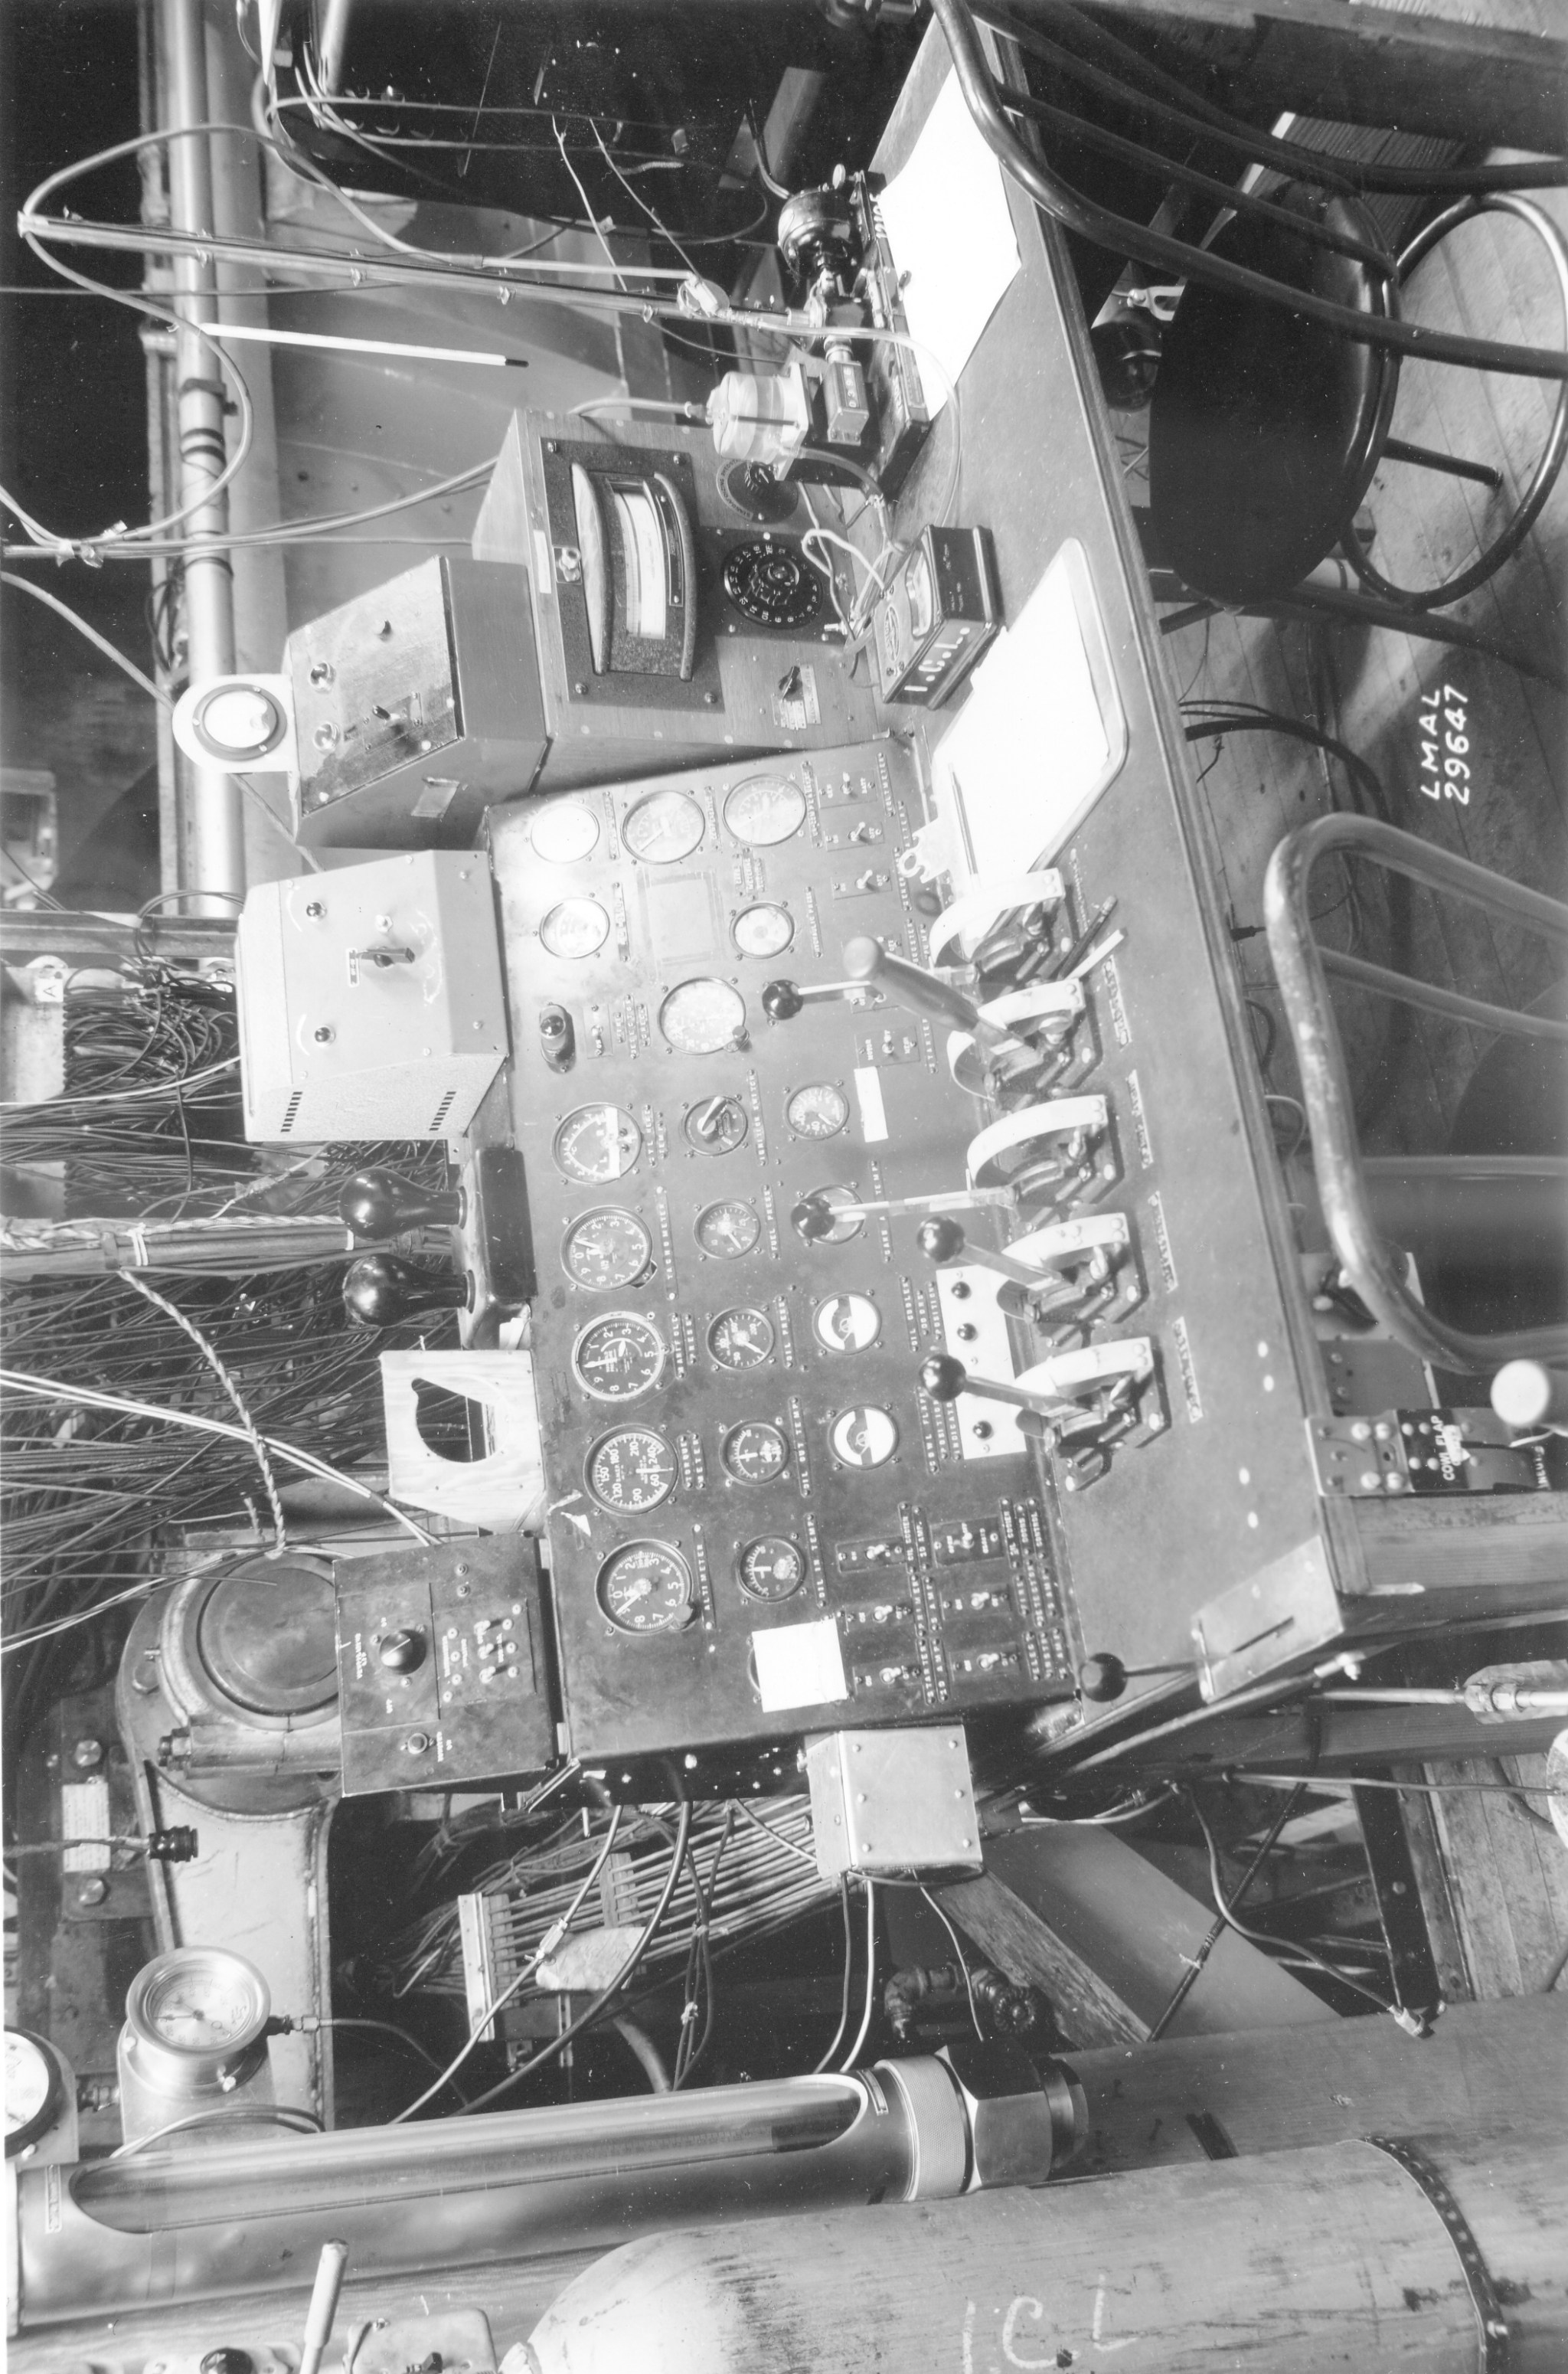 Test equipment used during testing of the U.S. Navy’s Douglas Destroyer torpedo/bomber aircraft (model XSB2D-1) in 1942. NASA photo.